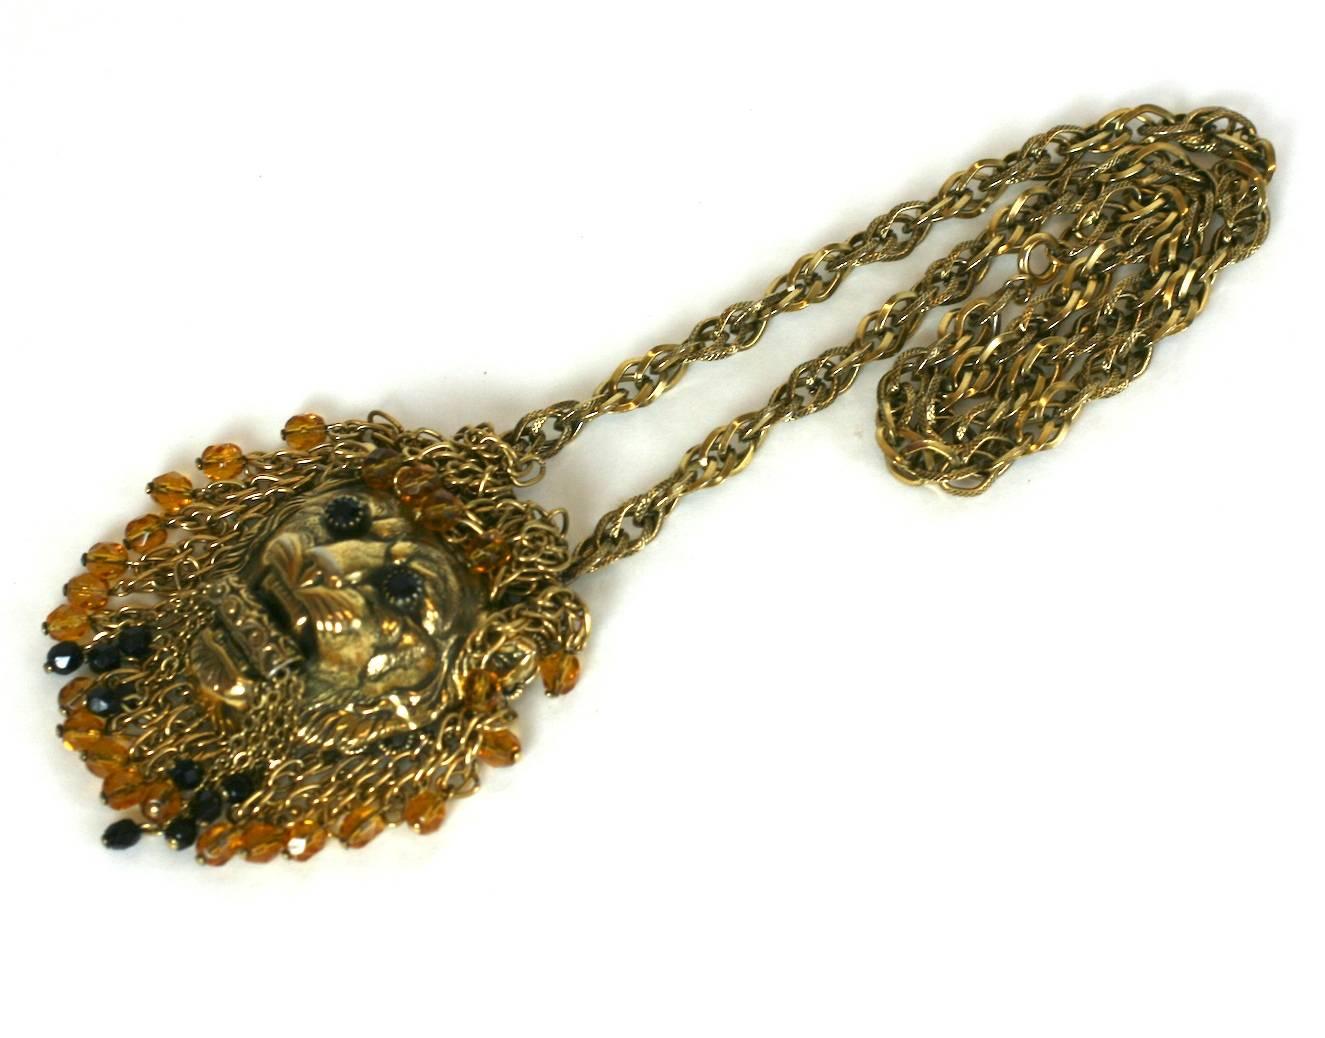 Striking gilt lion head necklace, the lions mane embellished in gilt chain with topaz and jet faceted crystals. The lions eyes of jets elaborately prong set. Necklace of rope gilt chain. Excellent Condition. 1960's USA. 
Length 25